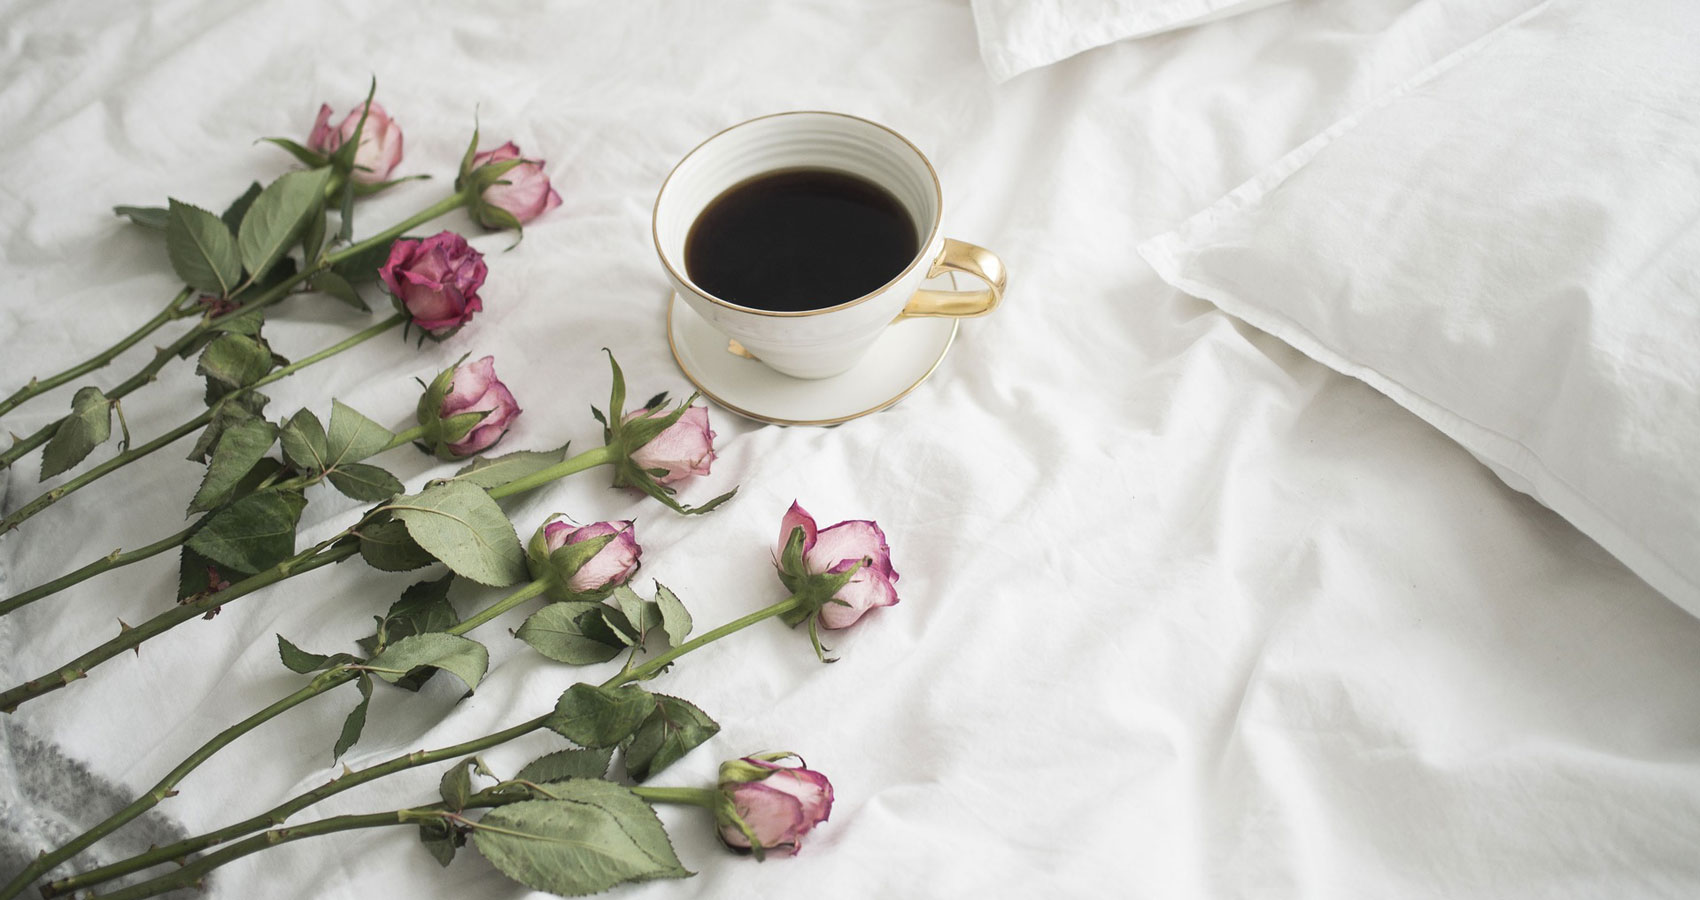 Coffee In Bed, a poem written by H.M. Gautsch at Spillwords.com